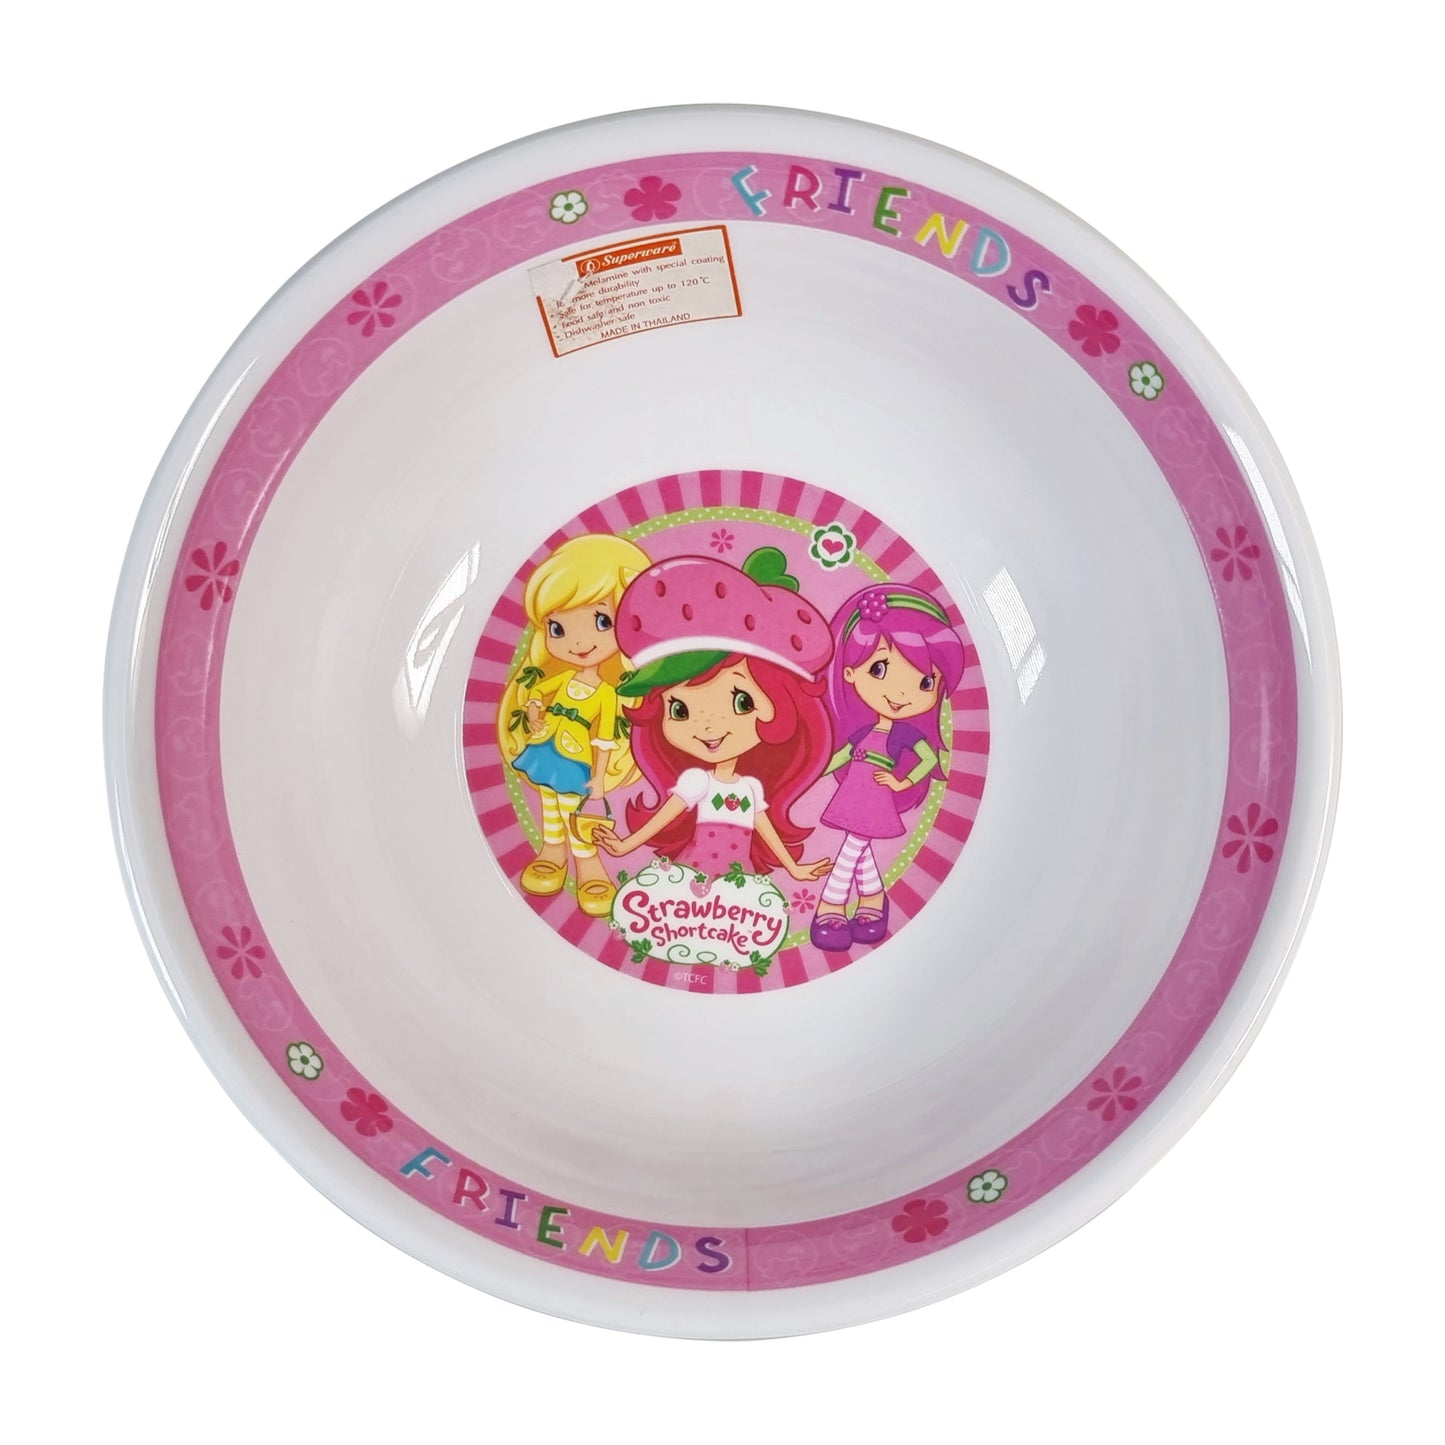 Strawberry Shortcake - Tableware, Bowl | Plate | Cup | Spoon | Fork (Different Items Available)